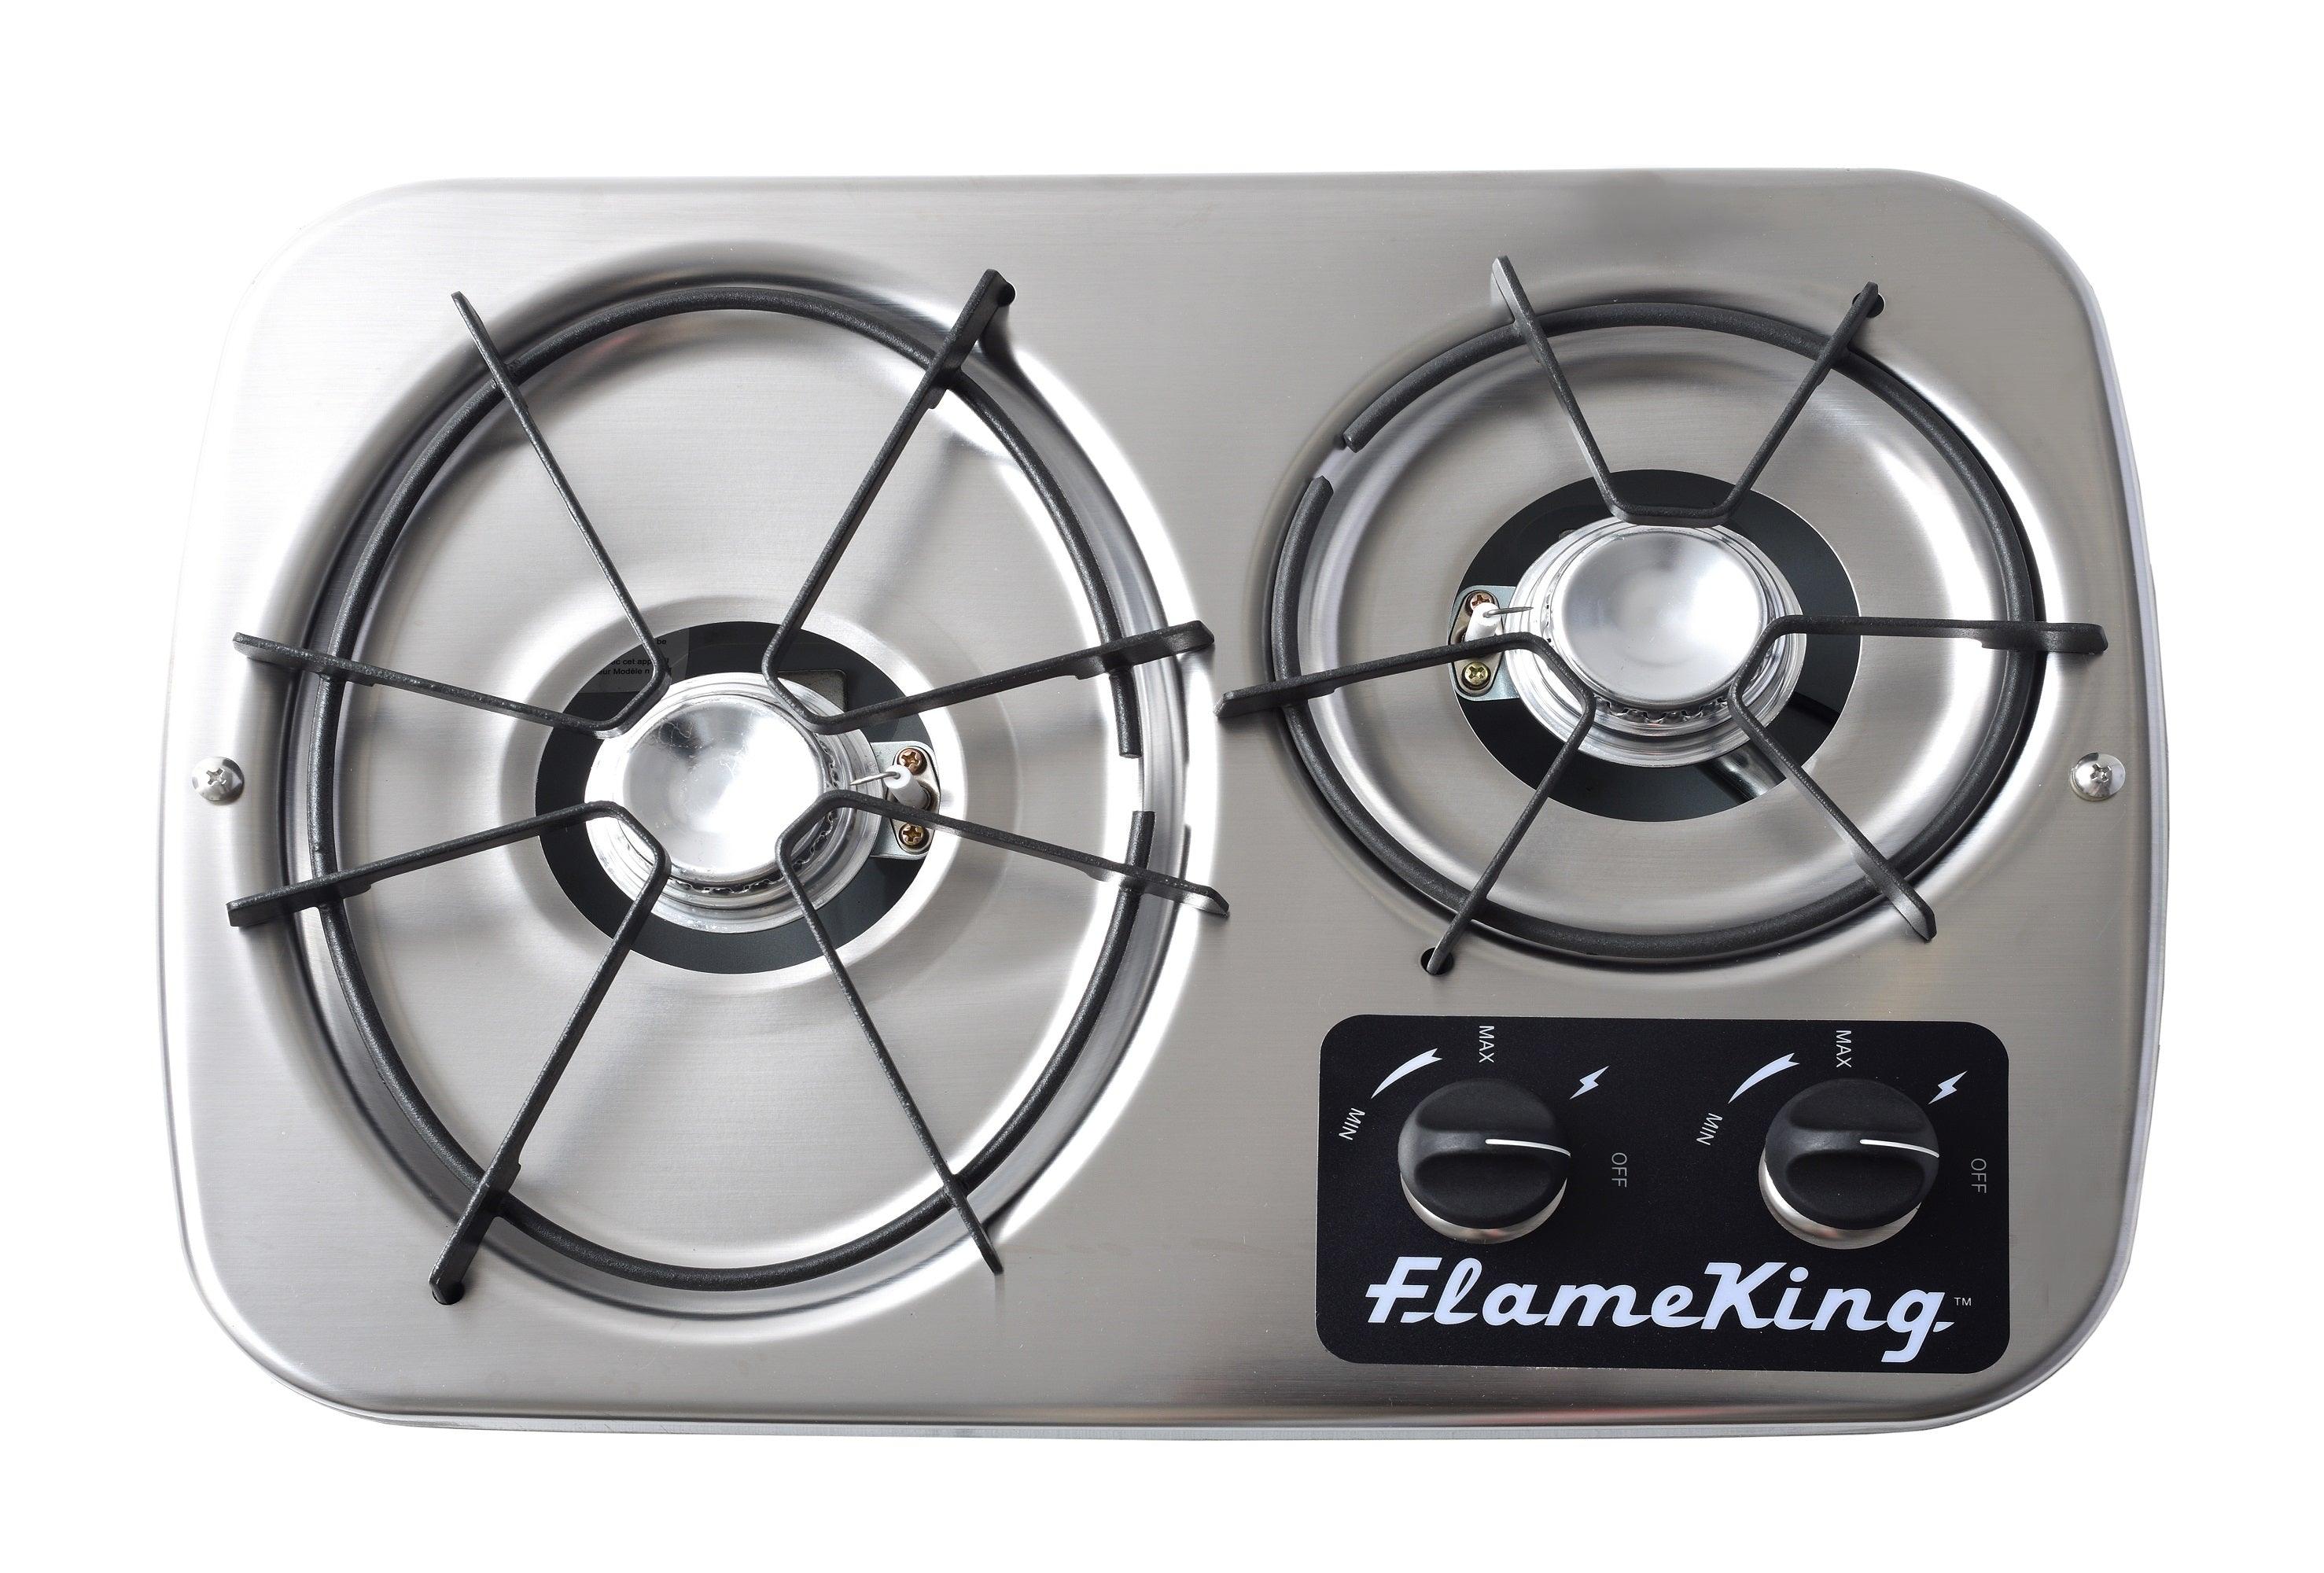 Flame King 2 Burner Built-In RV Trailer Stove with Wind Shield - Flame King